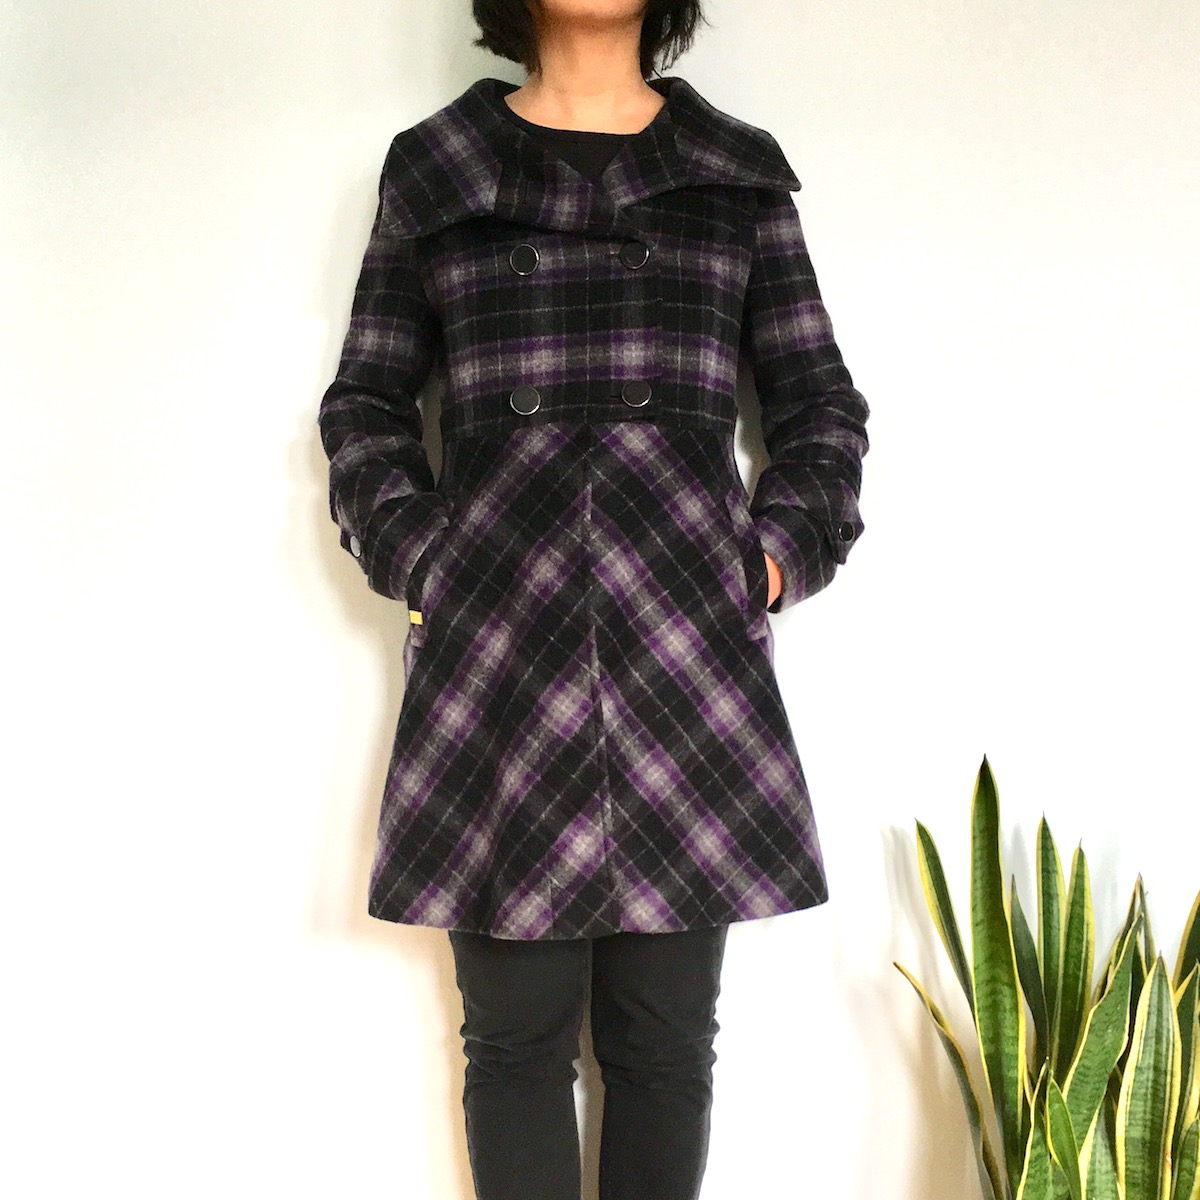 Selling on Poshmark: Tips from a Posh Ambassador: A woman with dark hair models a purple and black plaid coat